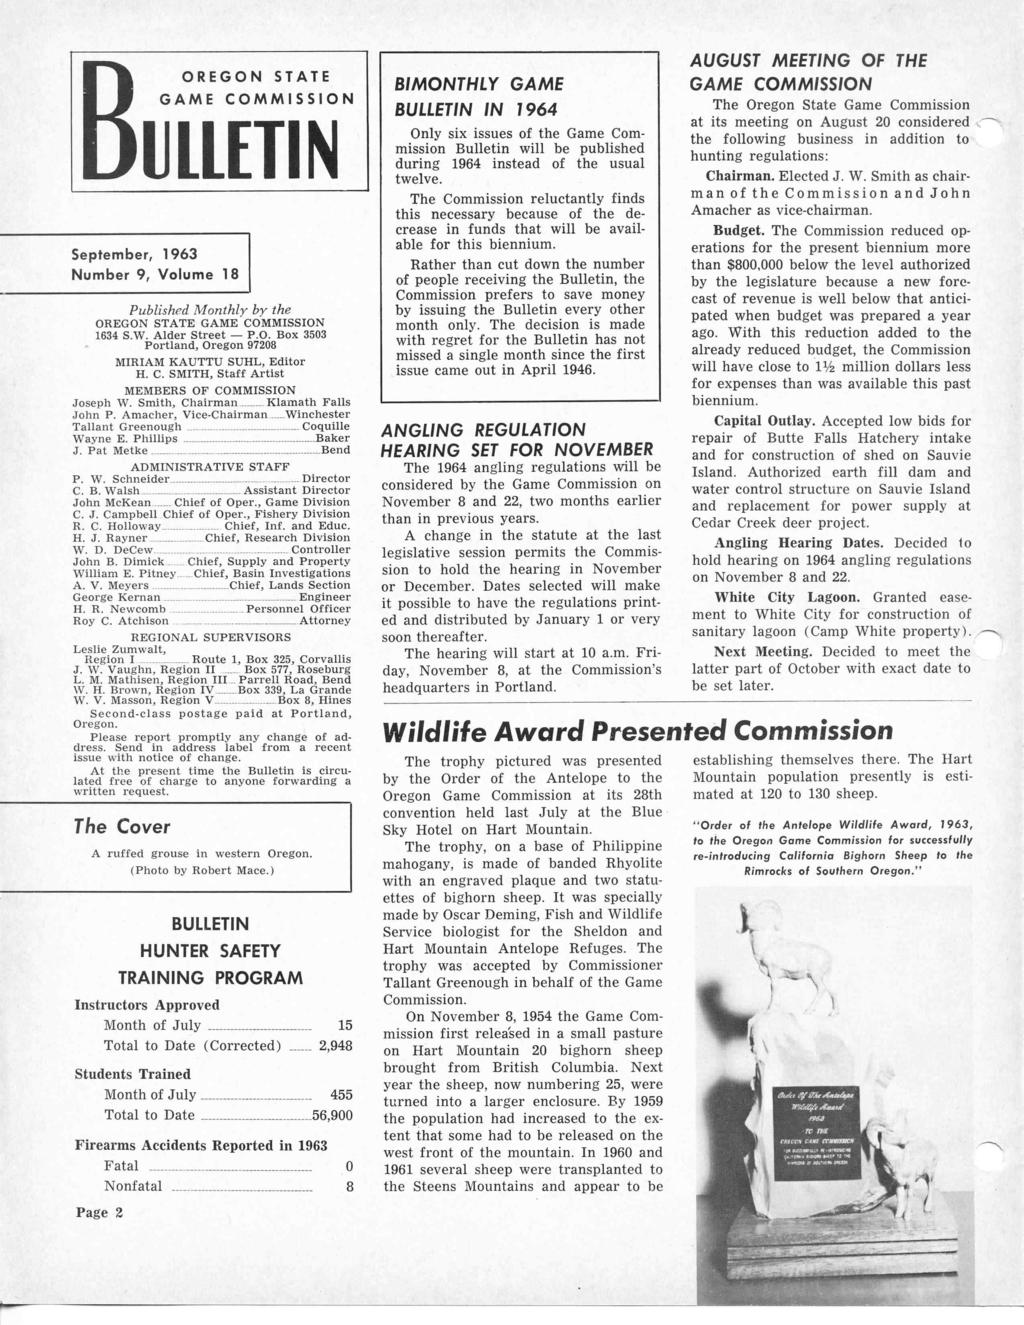 GAME EE G 0 STATE COMMISSION ULLETIN September, 1963 Number 9, Volume 18 Published Monthly by the OREGON STATE GAME COMMISSION 1634 S.W. Alder Street P.O. Box 3503 Portland, Oregon 97208 MIRIAM KAUTTU SUHL, Editor H.